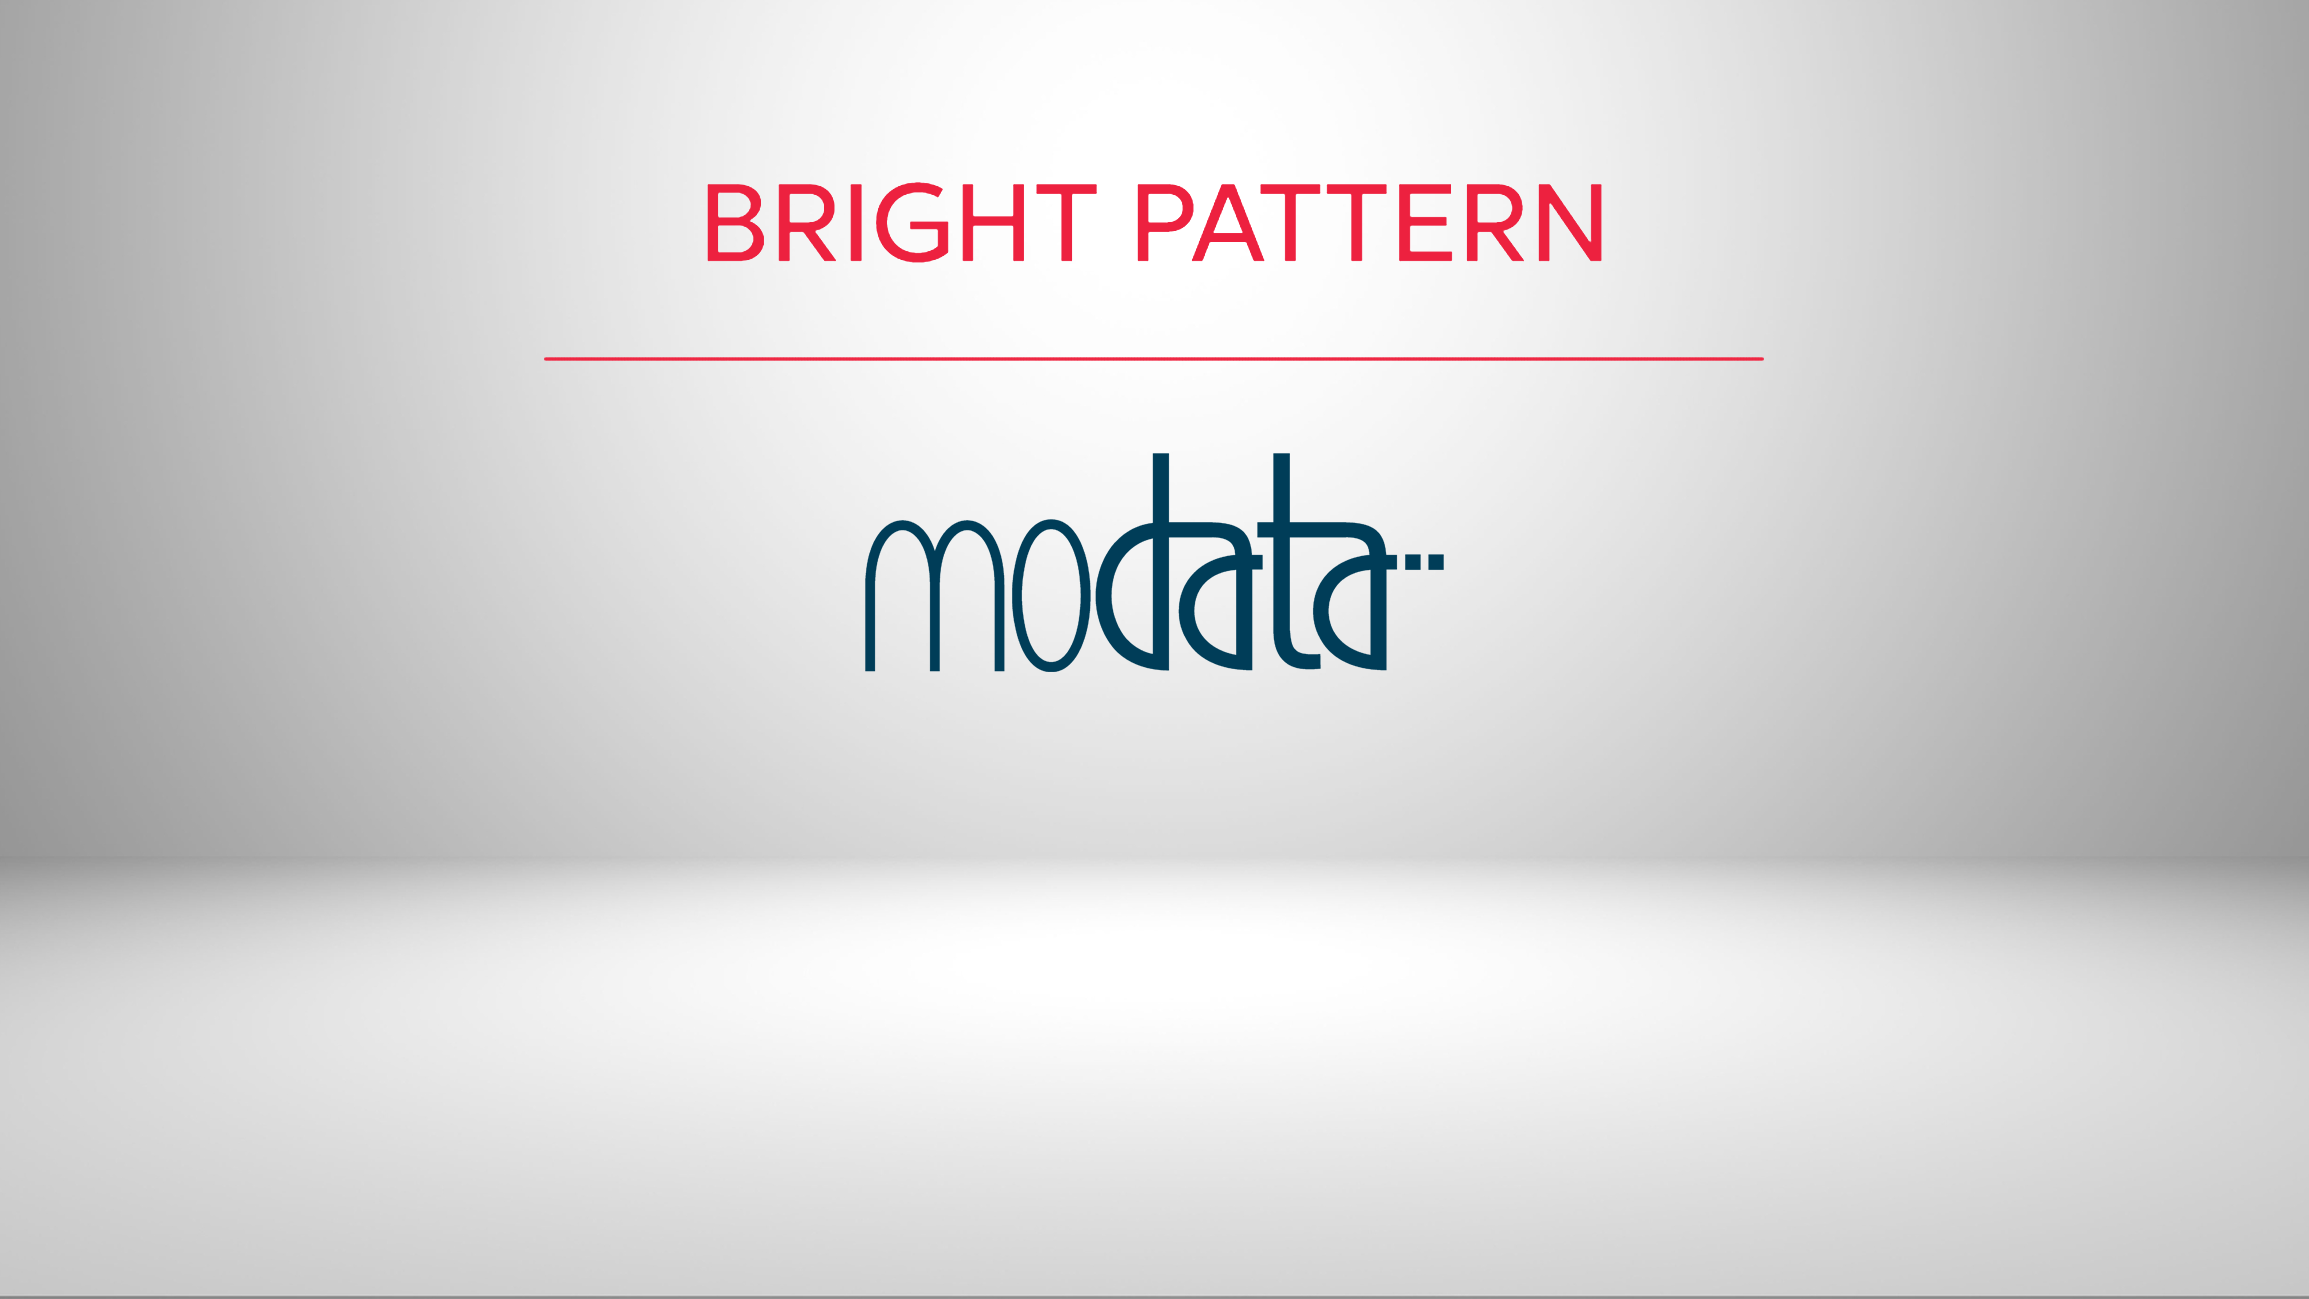 Bright Pattern Partners with MoData in South Africa to Transform CX and AI Capabilities